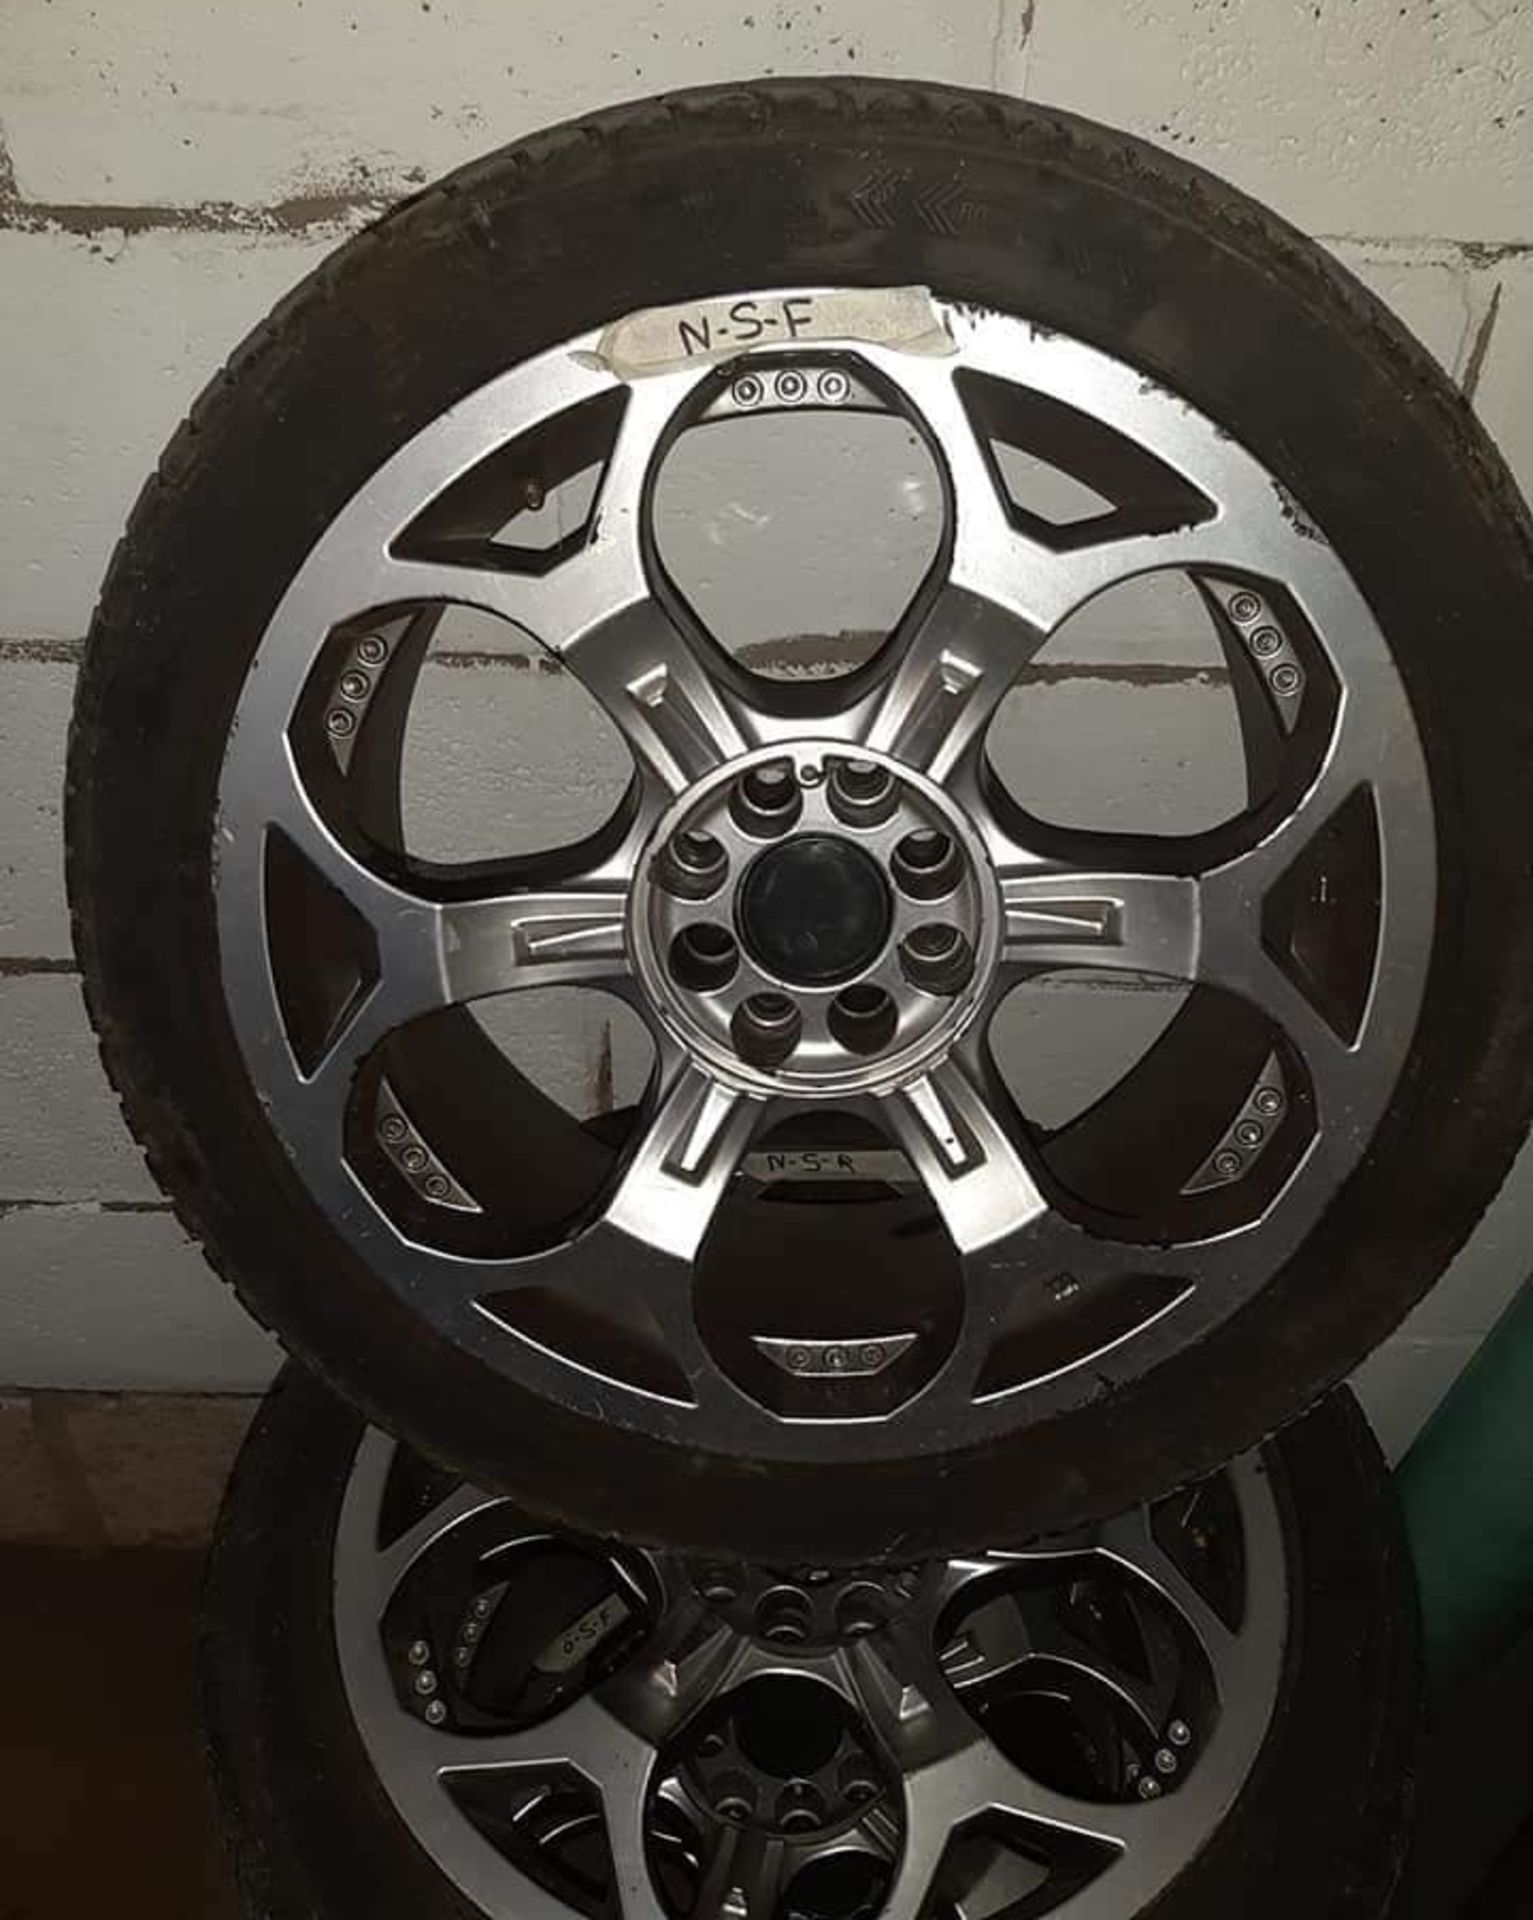 Set of 4 Multi Fitment 4 Stud 17" x 7.0" Alloy Wheels with 205/45ZR17 Tyres - CL444 - No VAT on - Image 9 of 9